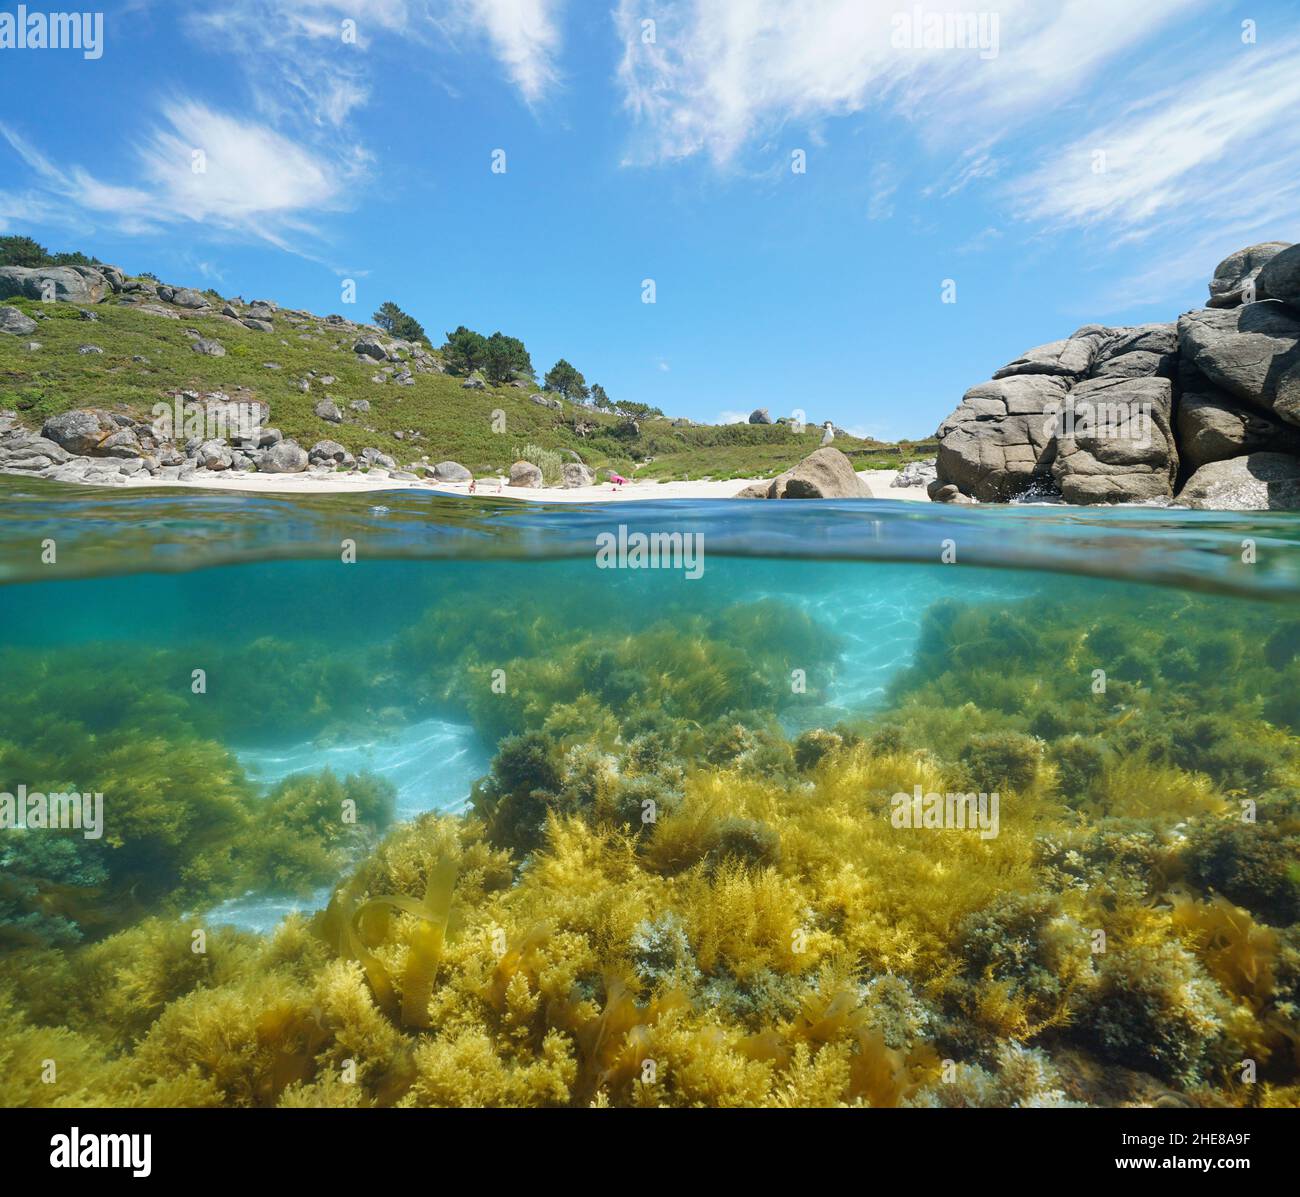 Spain, Galicia, coastline with sandy beach and rock, split level view over and under water surface, Eastern Atlantic ocean, Bueu, Pontevedra province Stock Photo